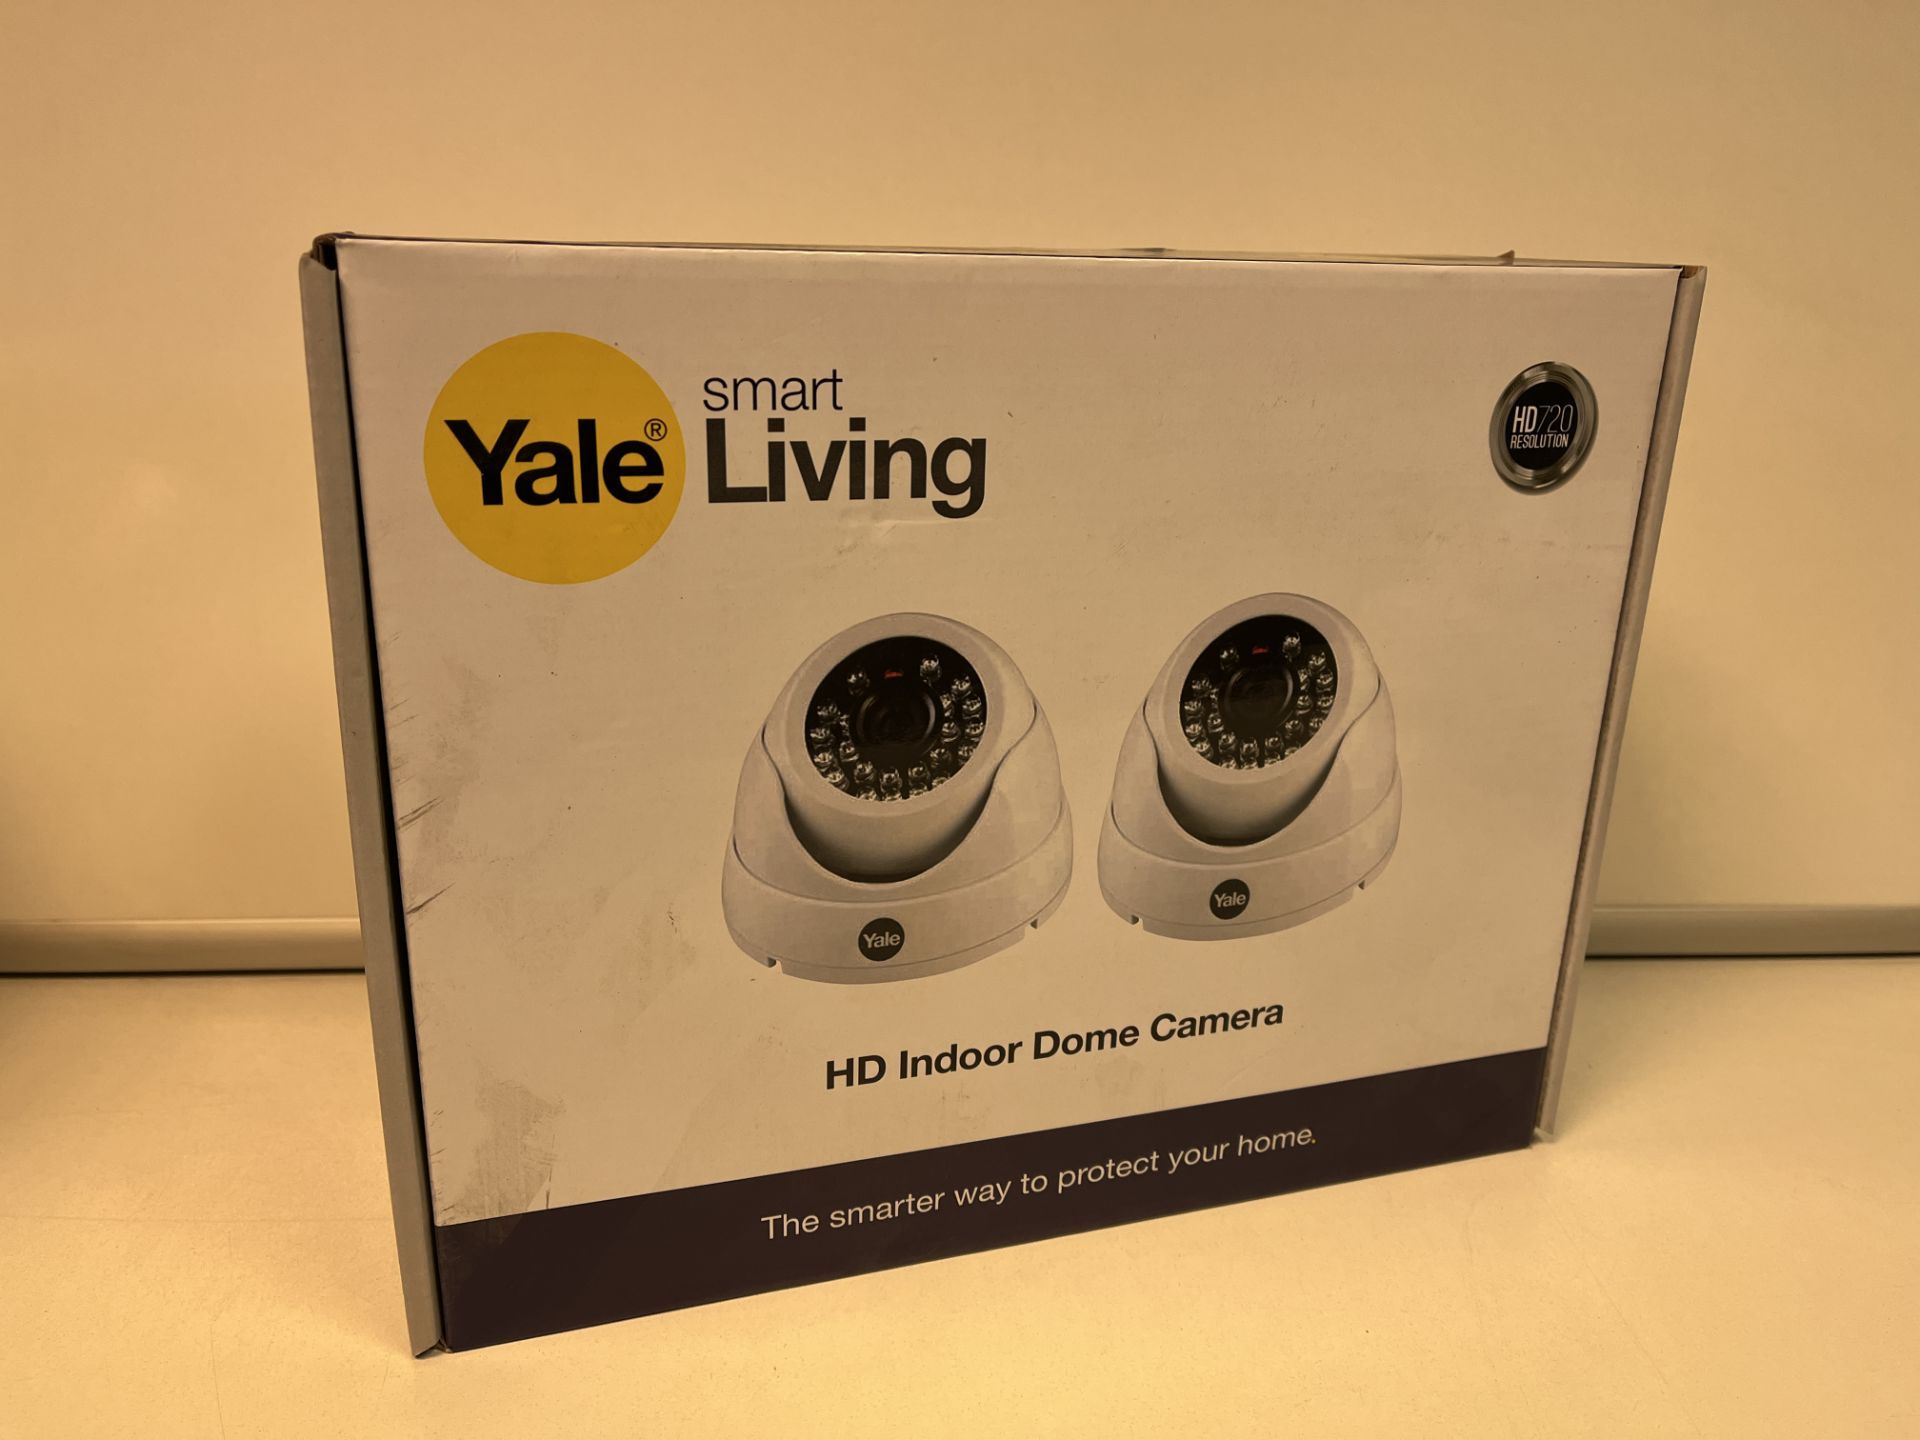 2 X NEW BOXED SETS OF 2 YALE SMART LIVING HD DOME CAMERAS. HD720 RESOLUTION WITH IR NIGHT VISION (